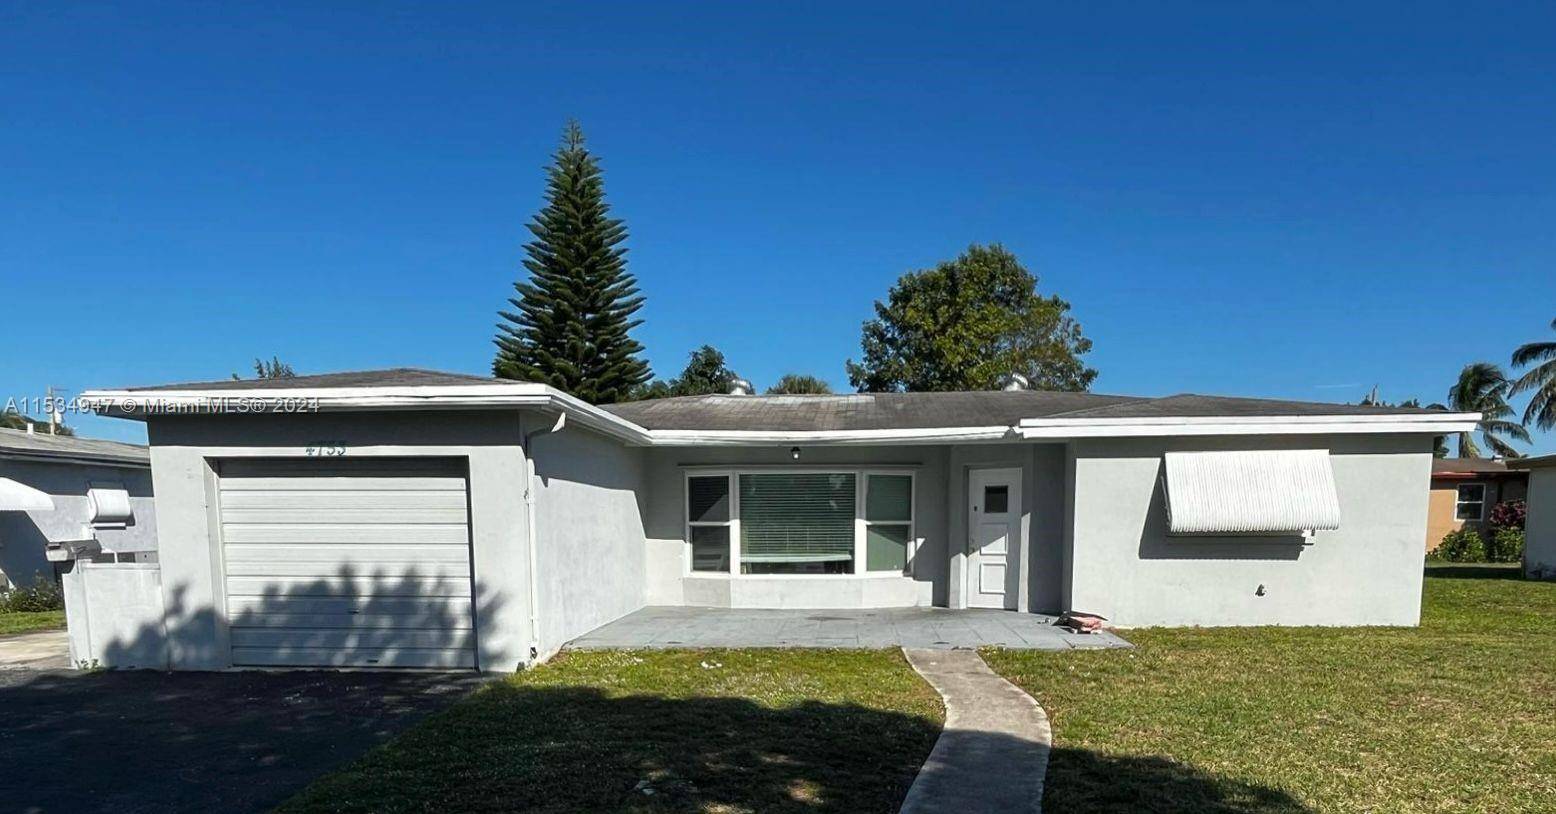 Single Family Home with 6 2 and 1 Car Garage ready for rent in Lauderdale Lakes, FL.